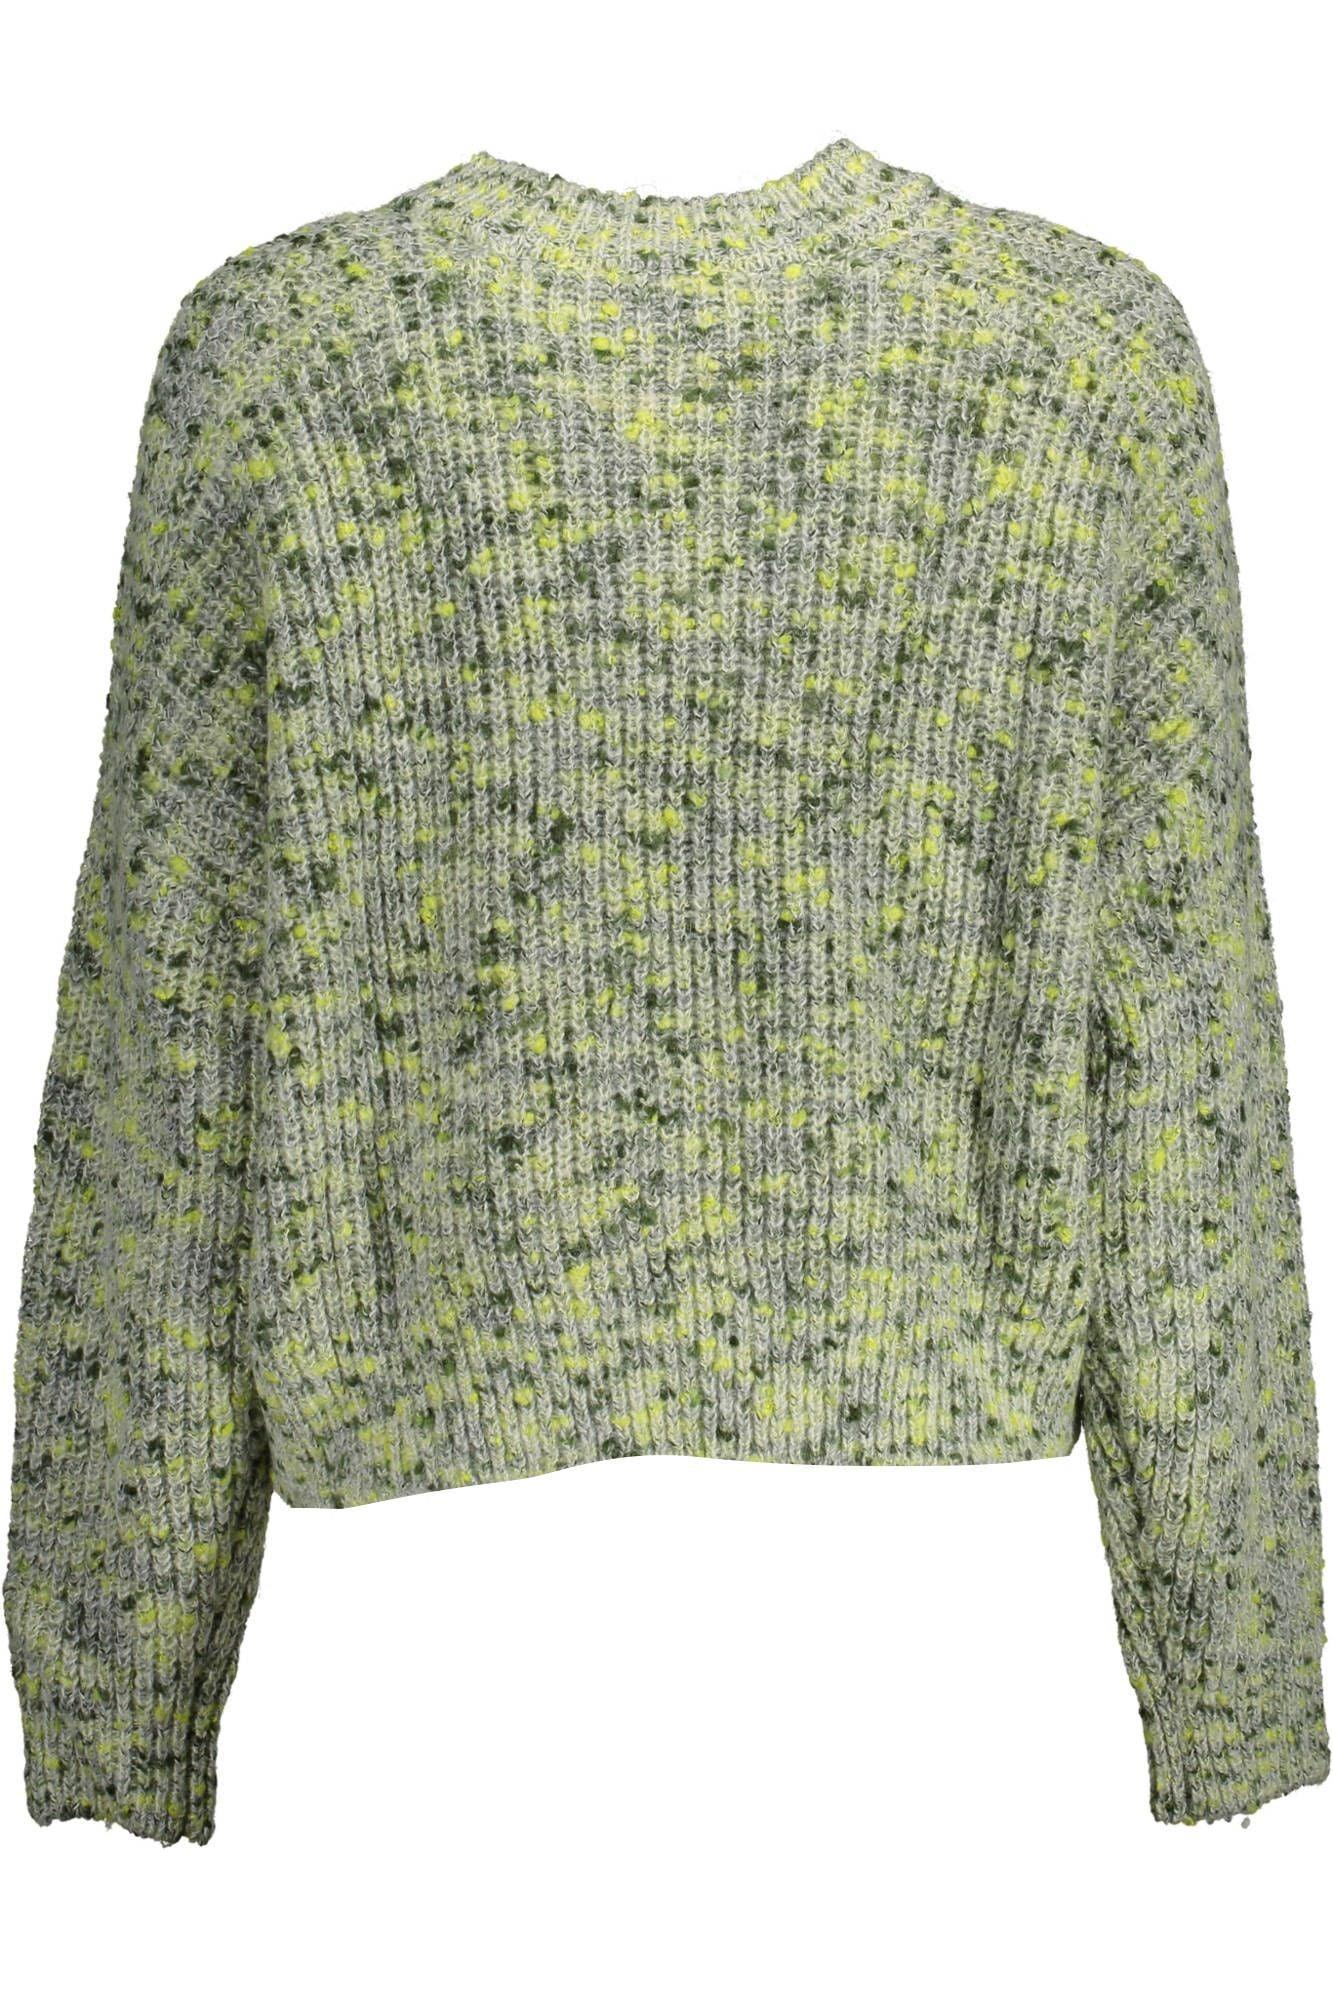 Desigual Green Embroidered Sweater with Contrasting Accents - PER.FASHION